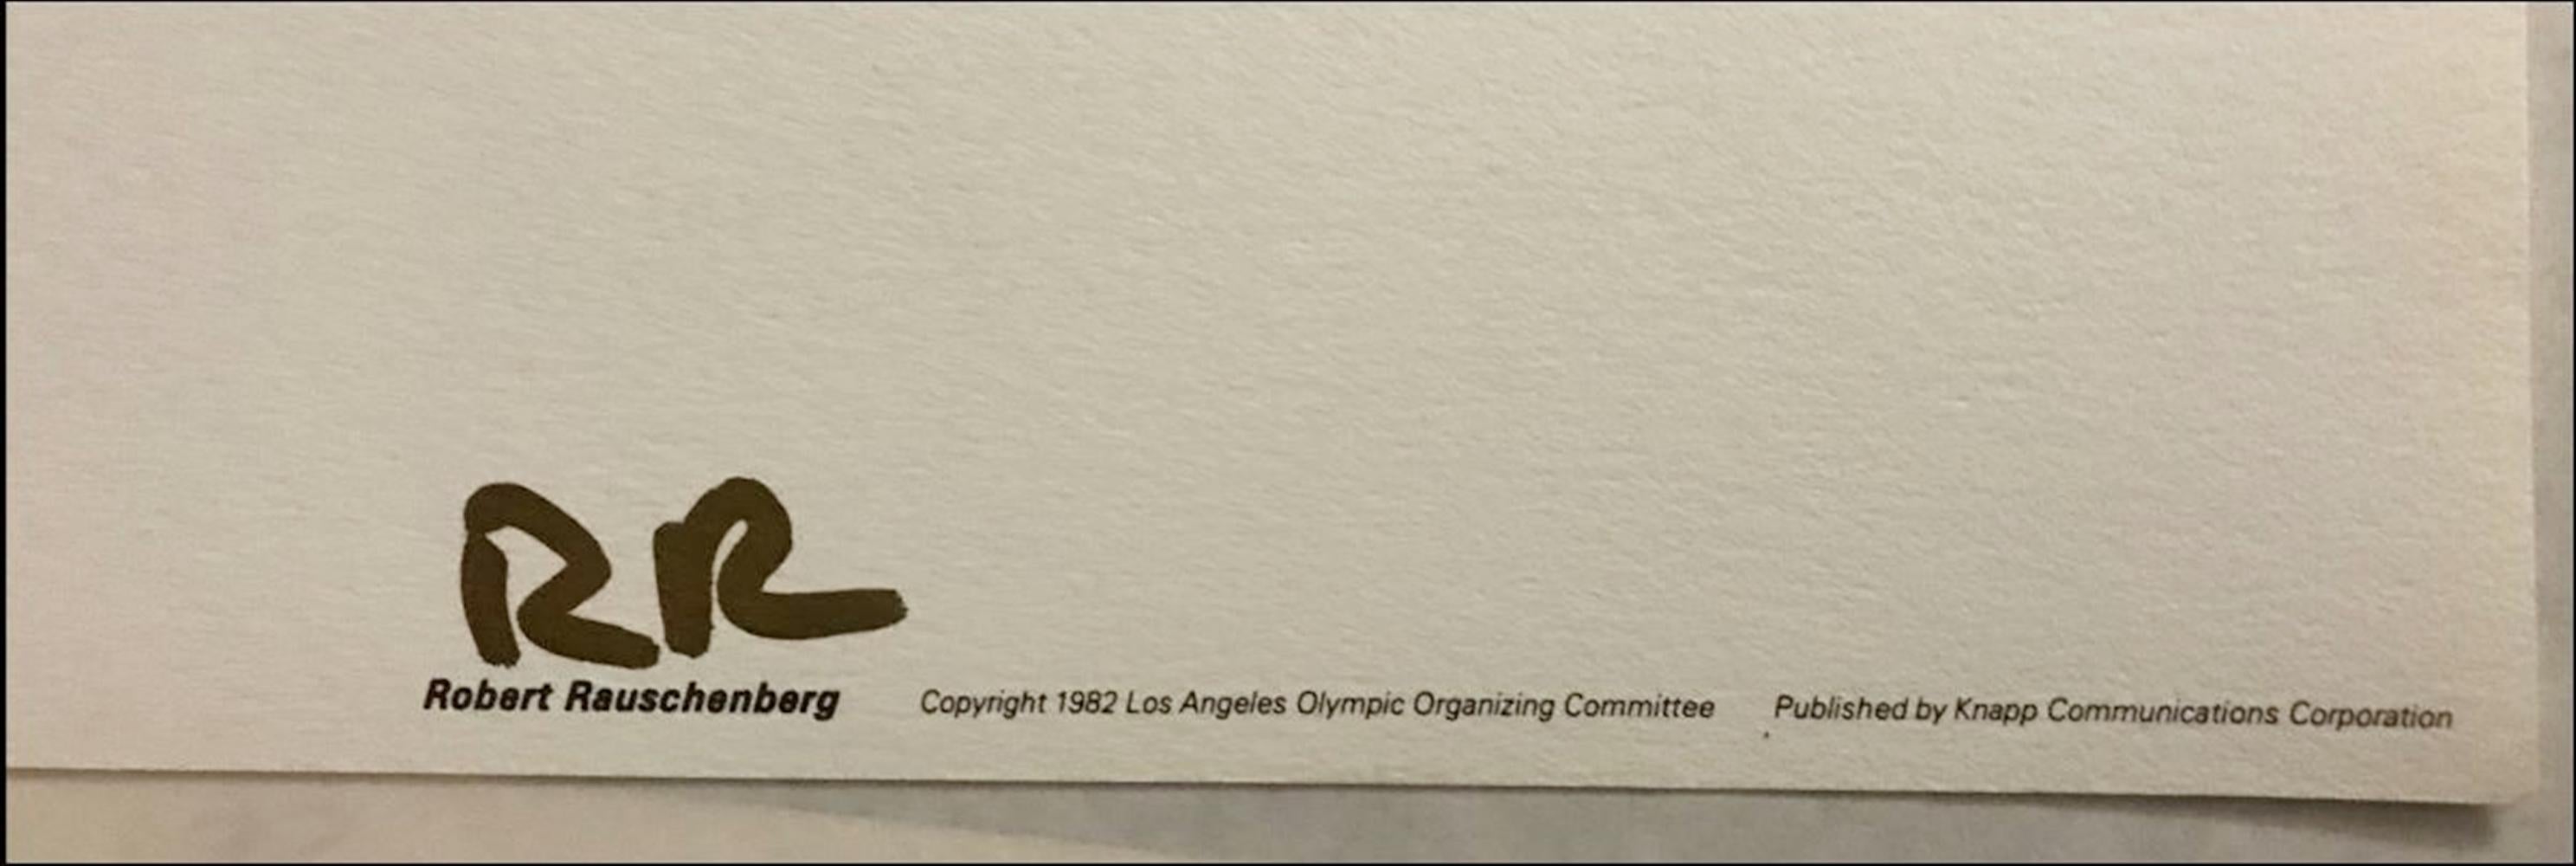 Los Angeles 1984 Olympic Games (with COA from Olympic Committee) - Pop Art Print by Robert Rauschenberg